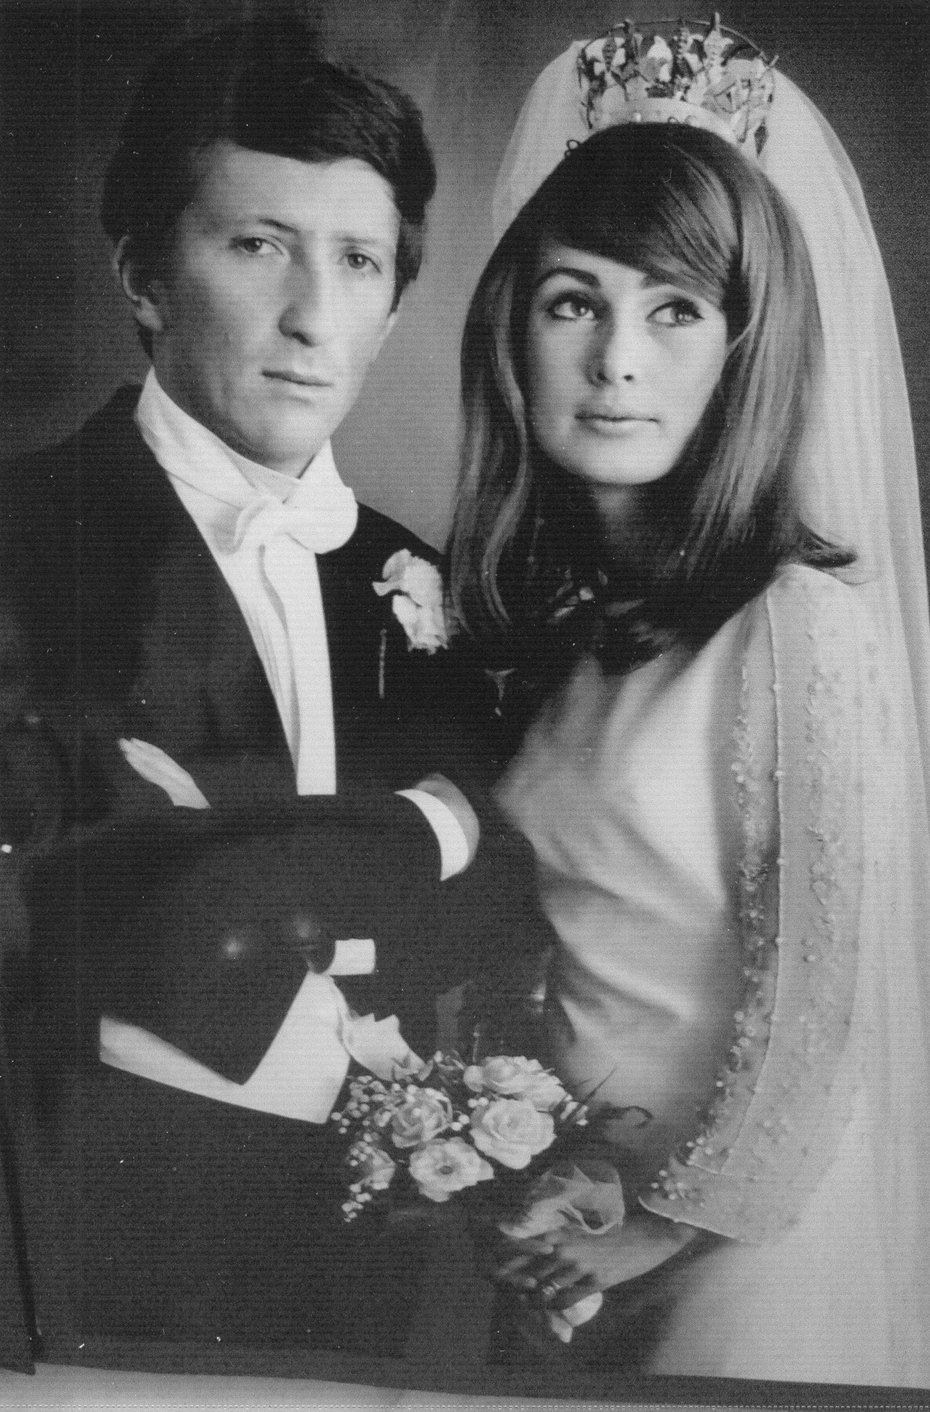 Jochen and Nina Rindt on their wedding day in 1967.